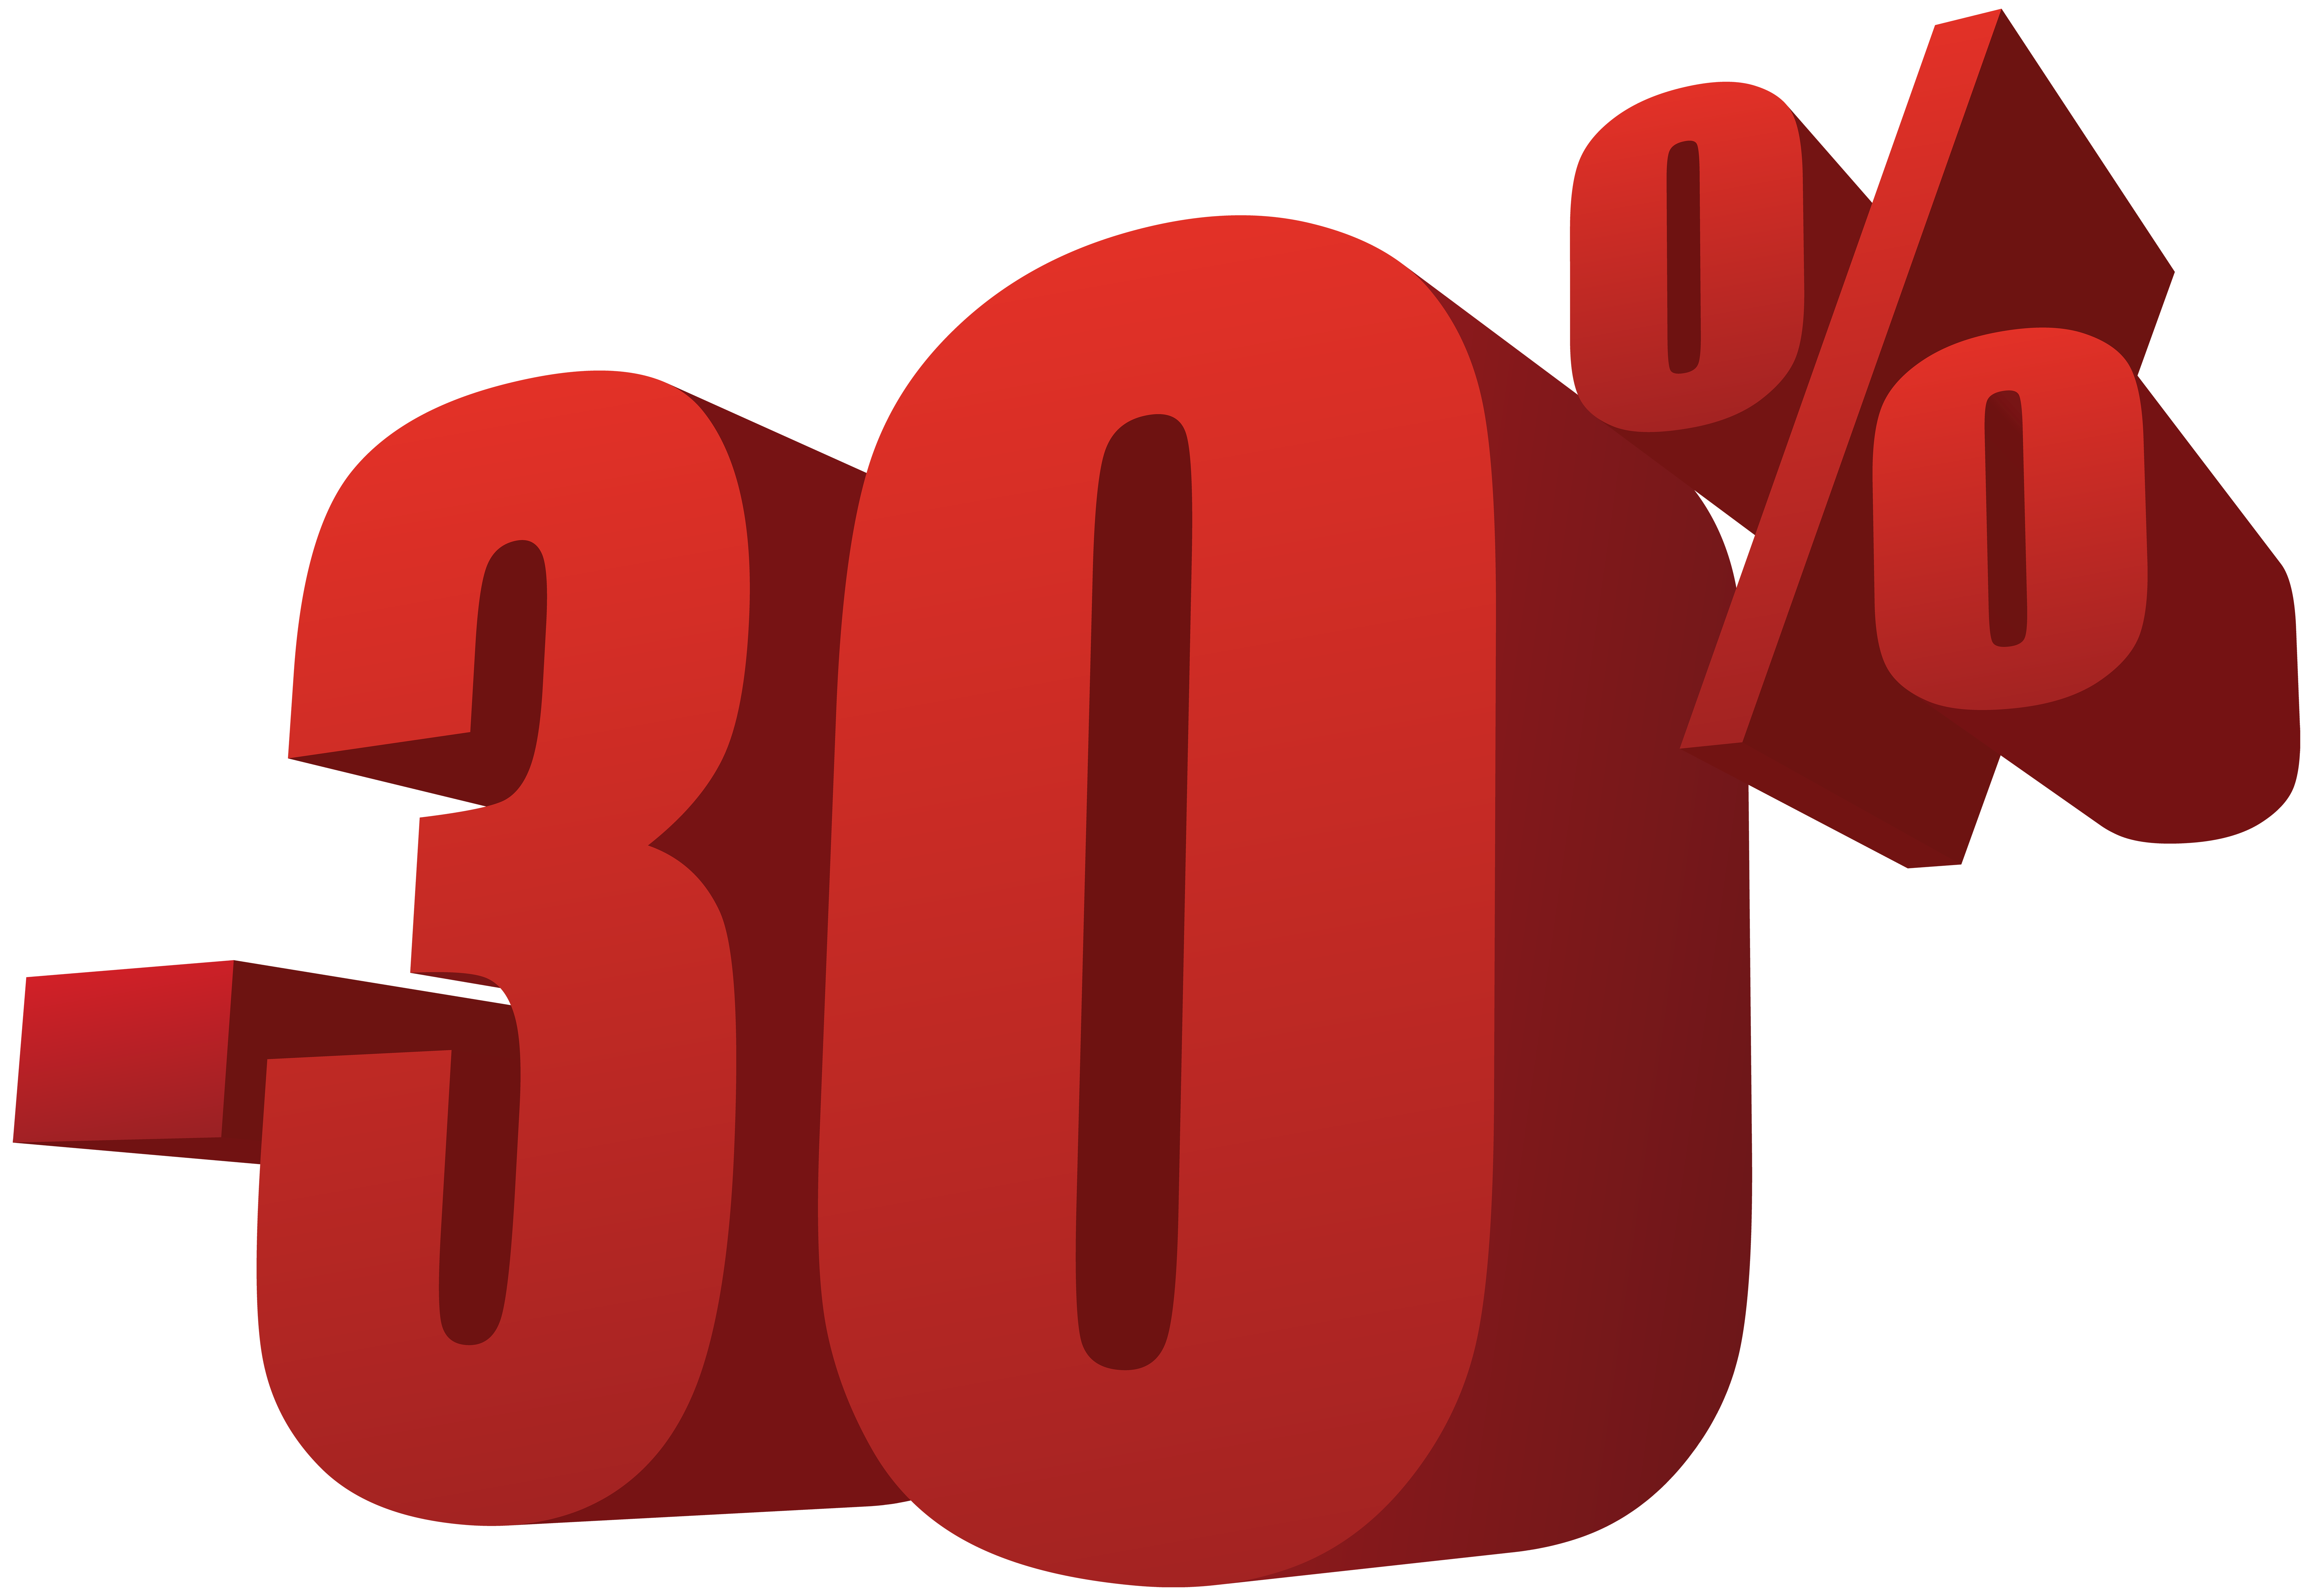 30% Discount PNG Pic